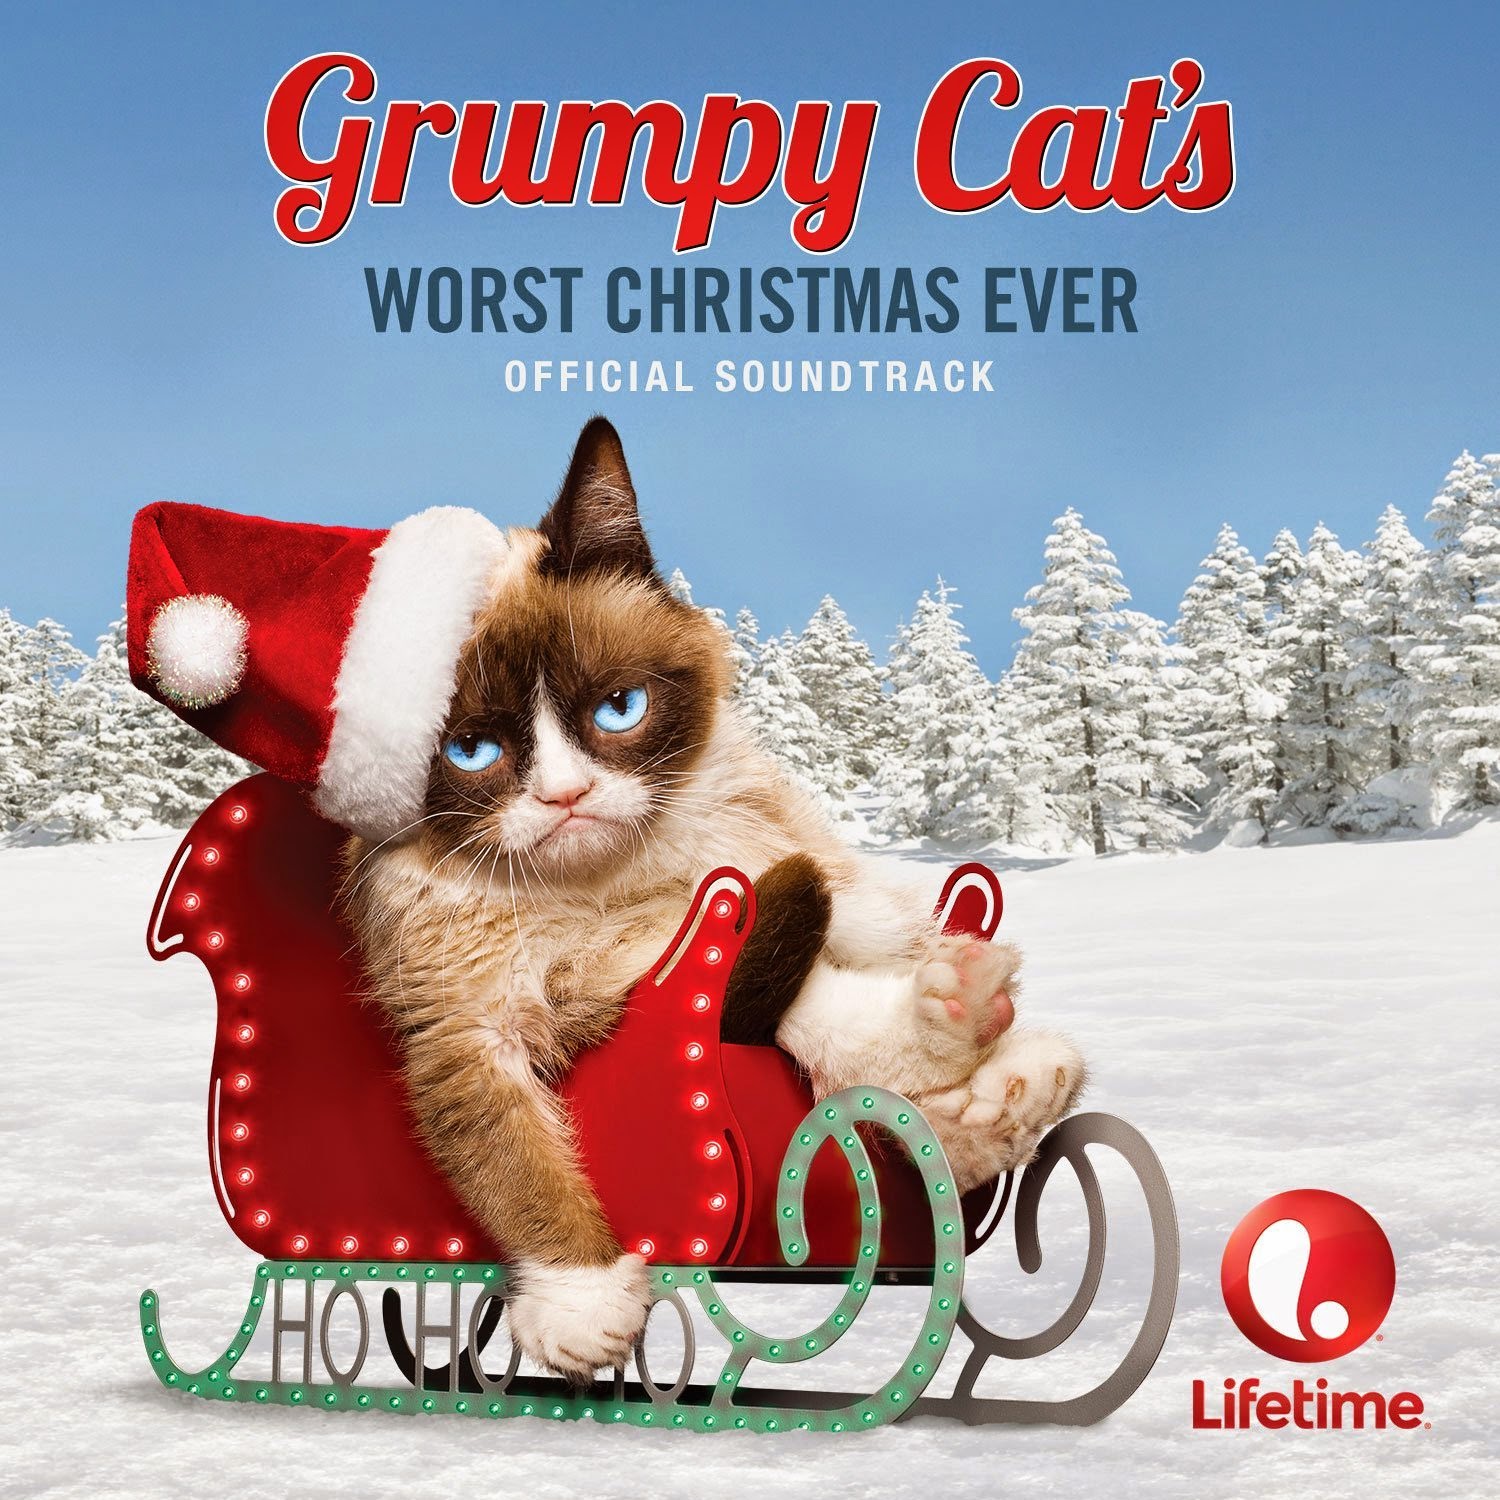 http://discover.halifaxpubliclibraries.ca/?q=title:grumpy%20cat%27s%20worst%20christmas%20ever